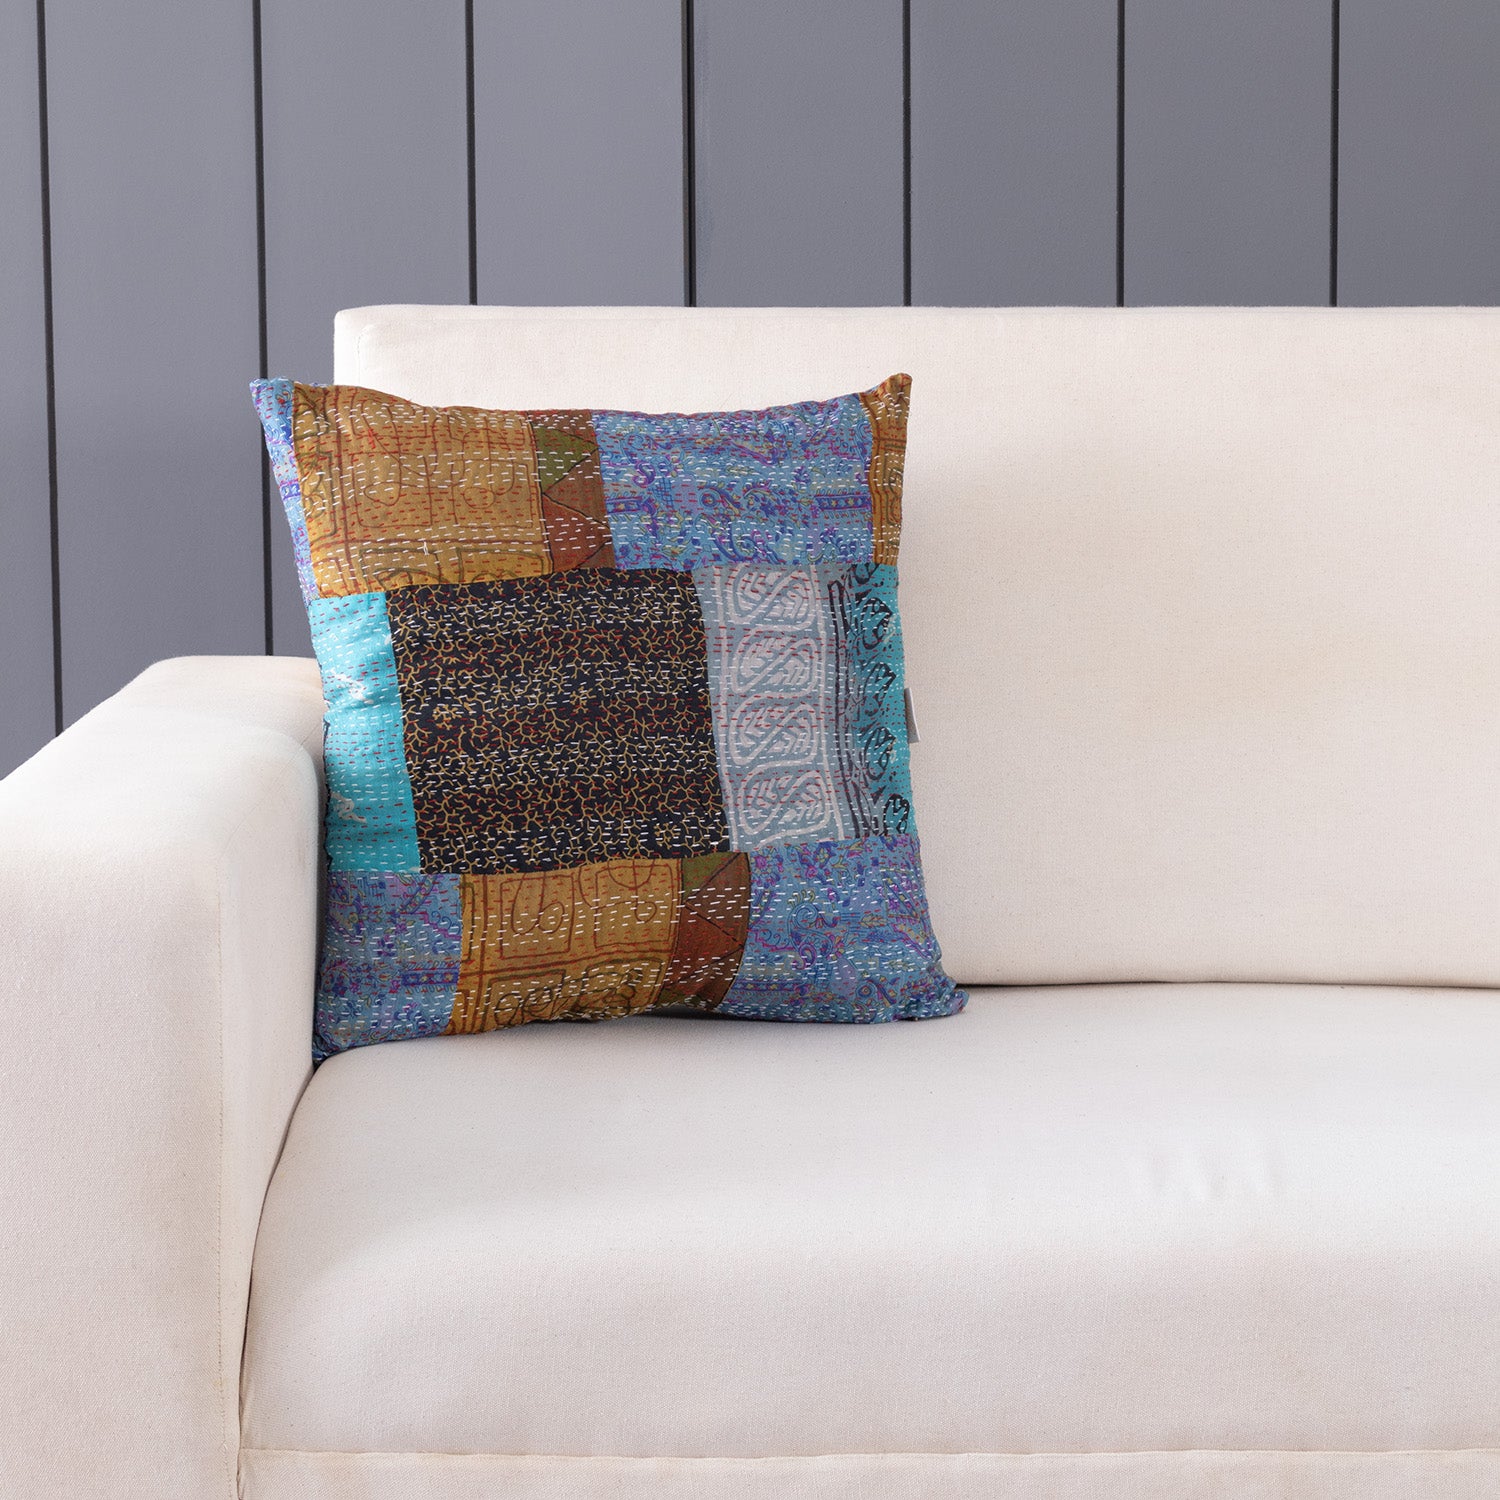 PatchWork Kantha Cushion Cover - 16x16